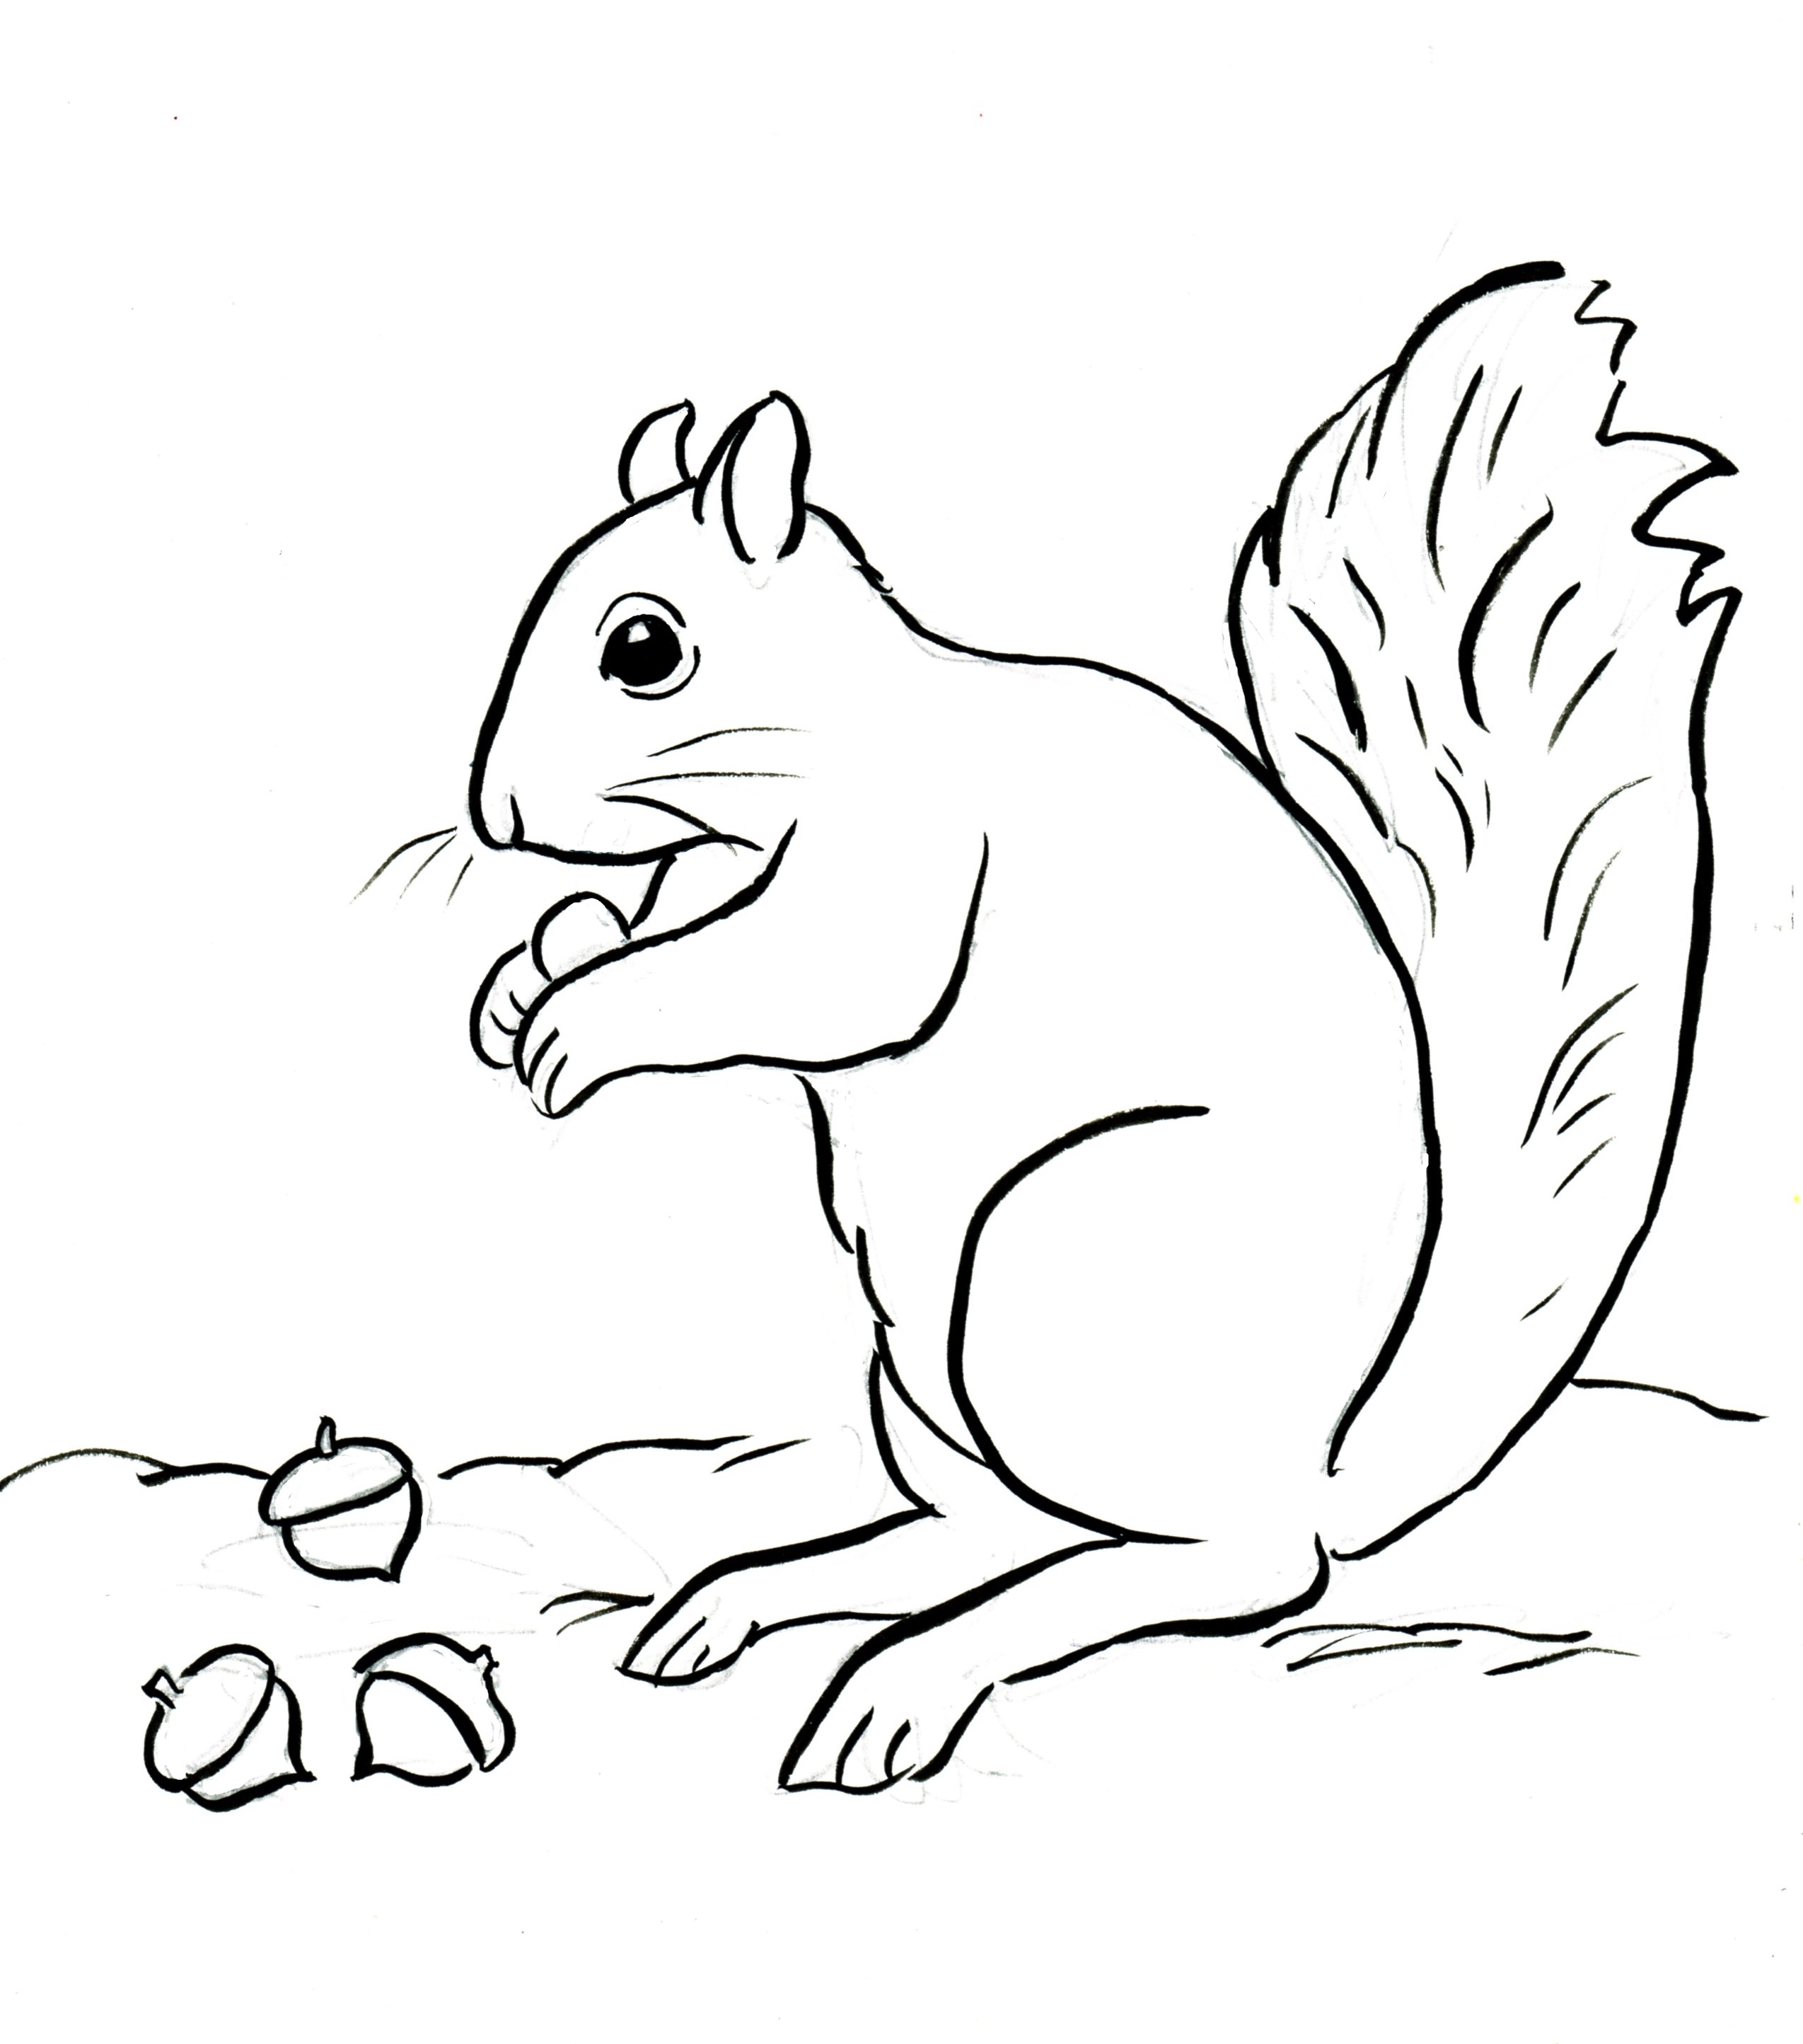 squirrel-coloring-page-samantha-bell